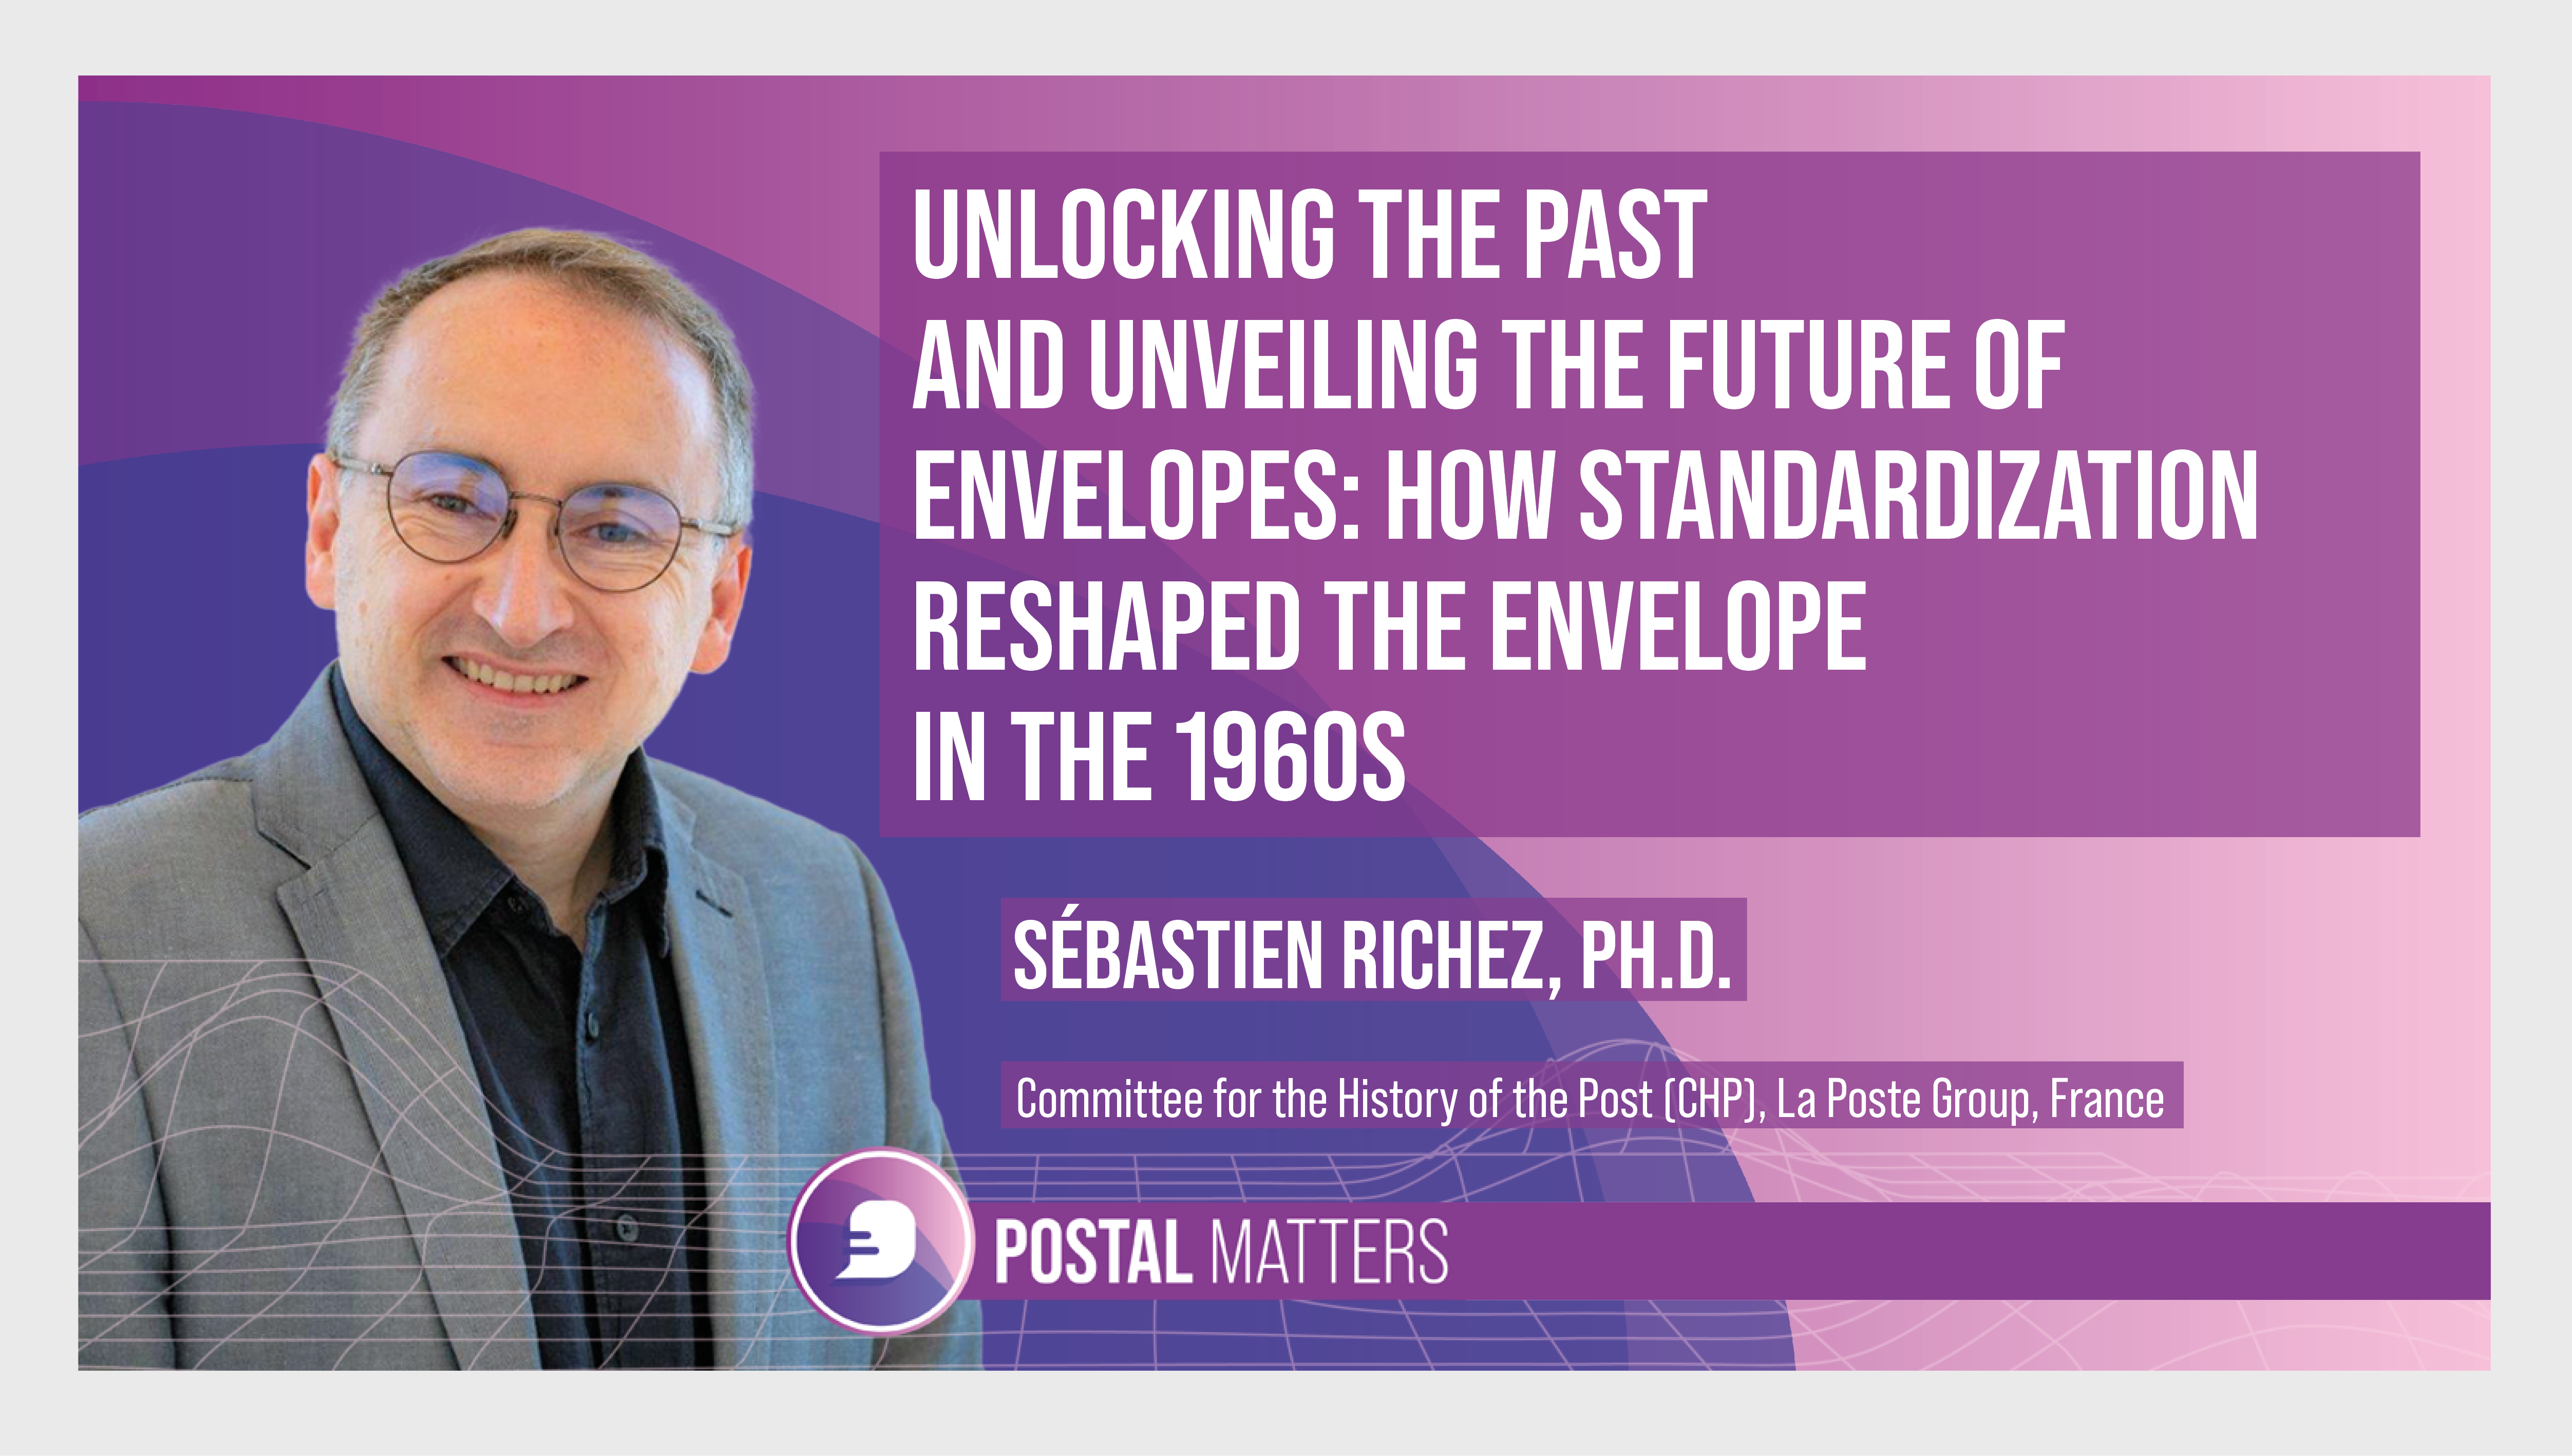 Unlocking the past and unveiling the future of envelopes: how standardization reshaped the envelope in the 1960s